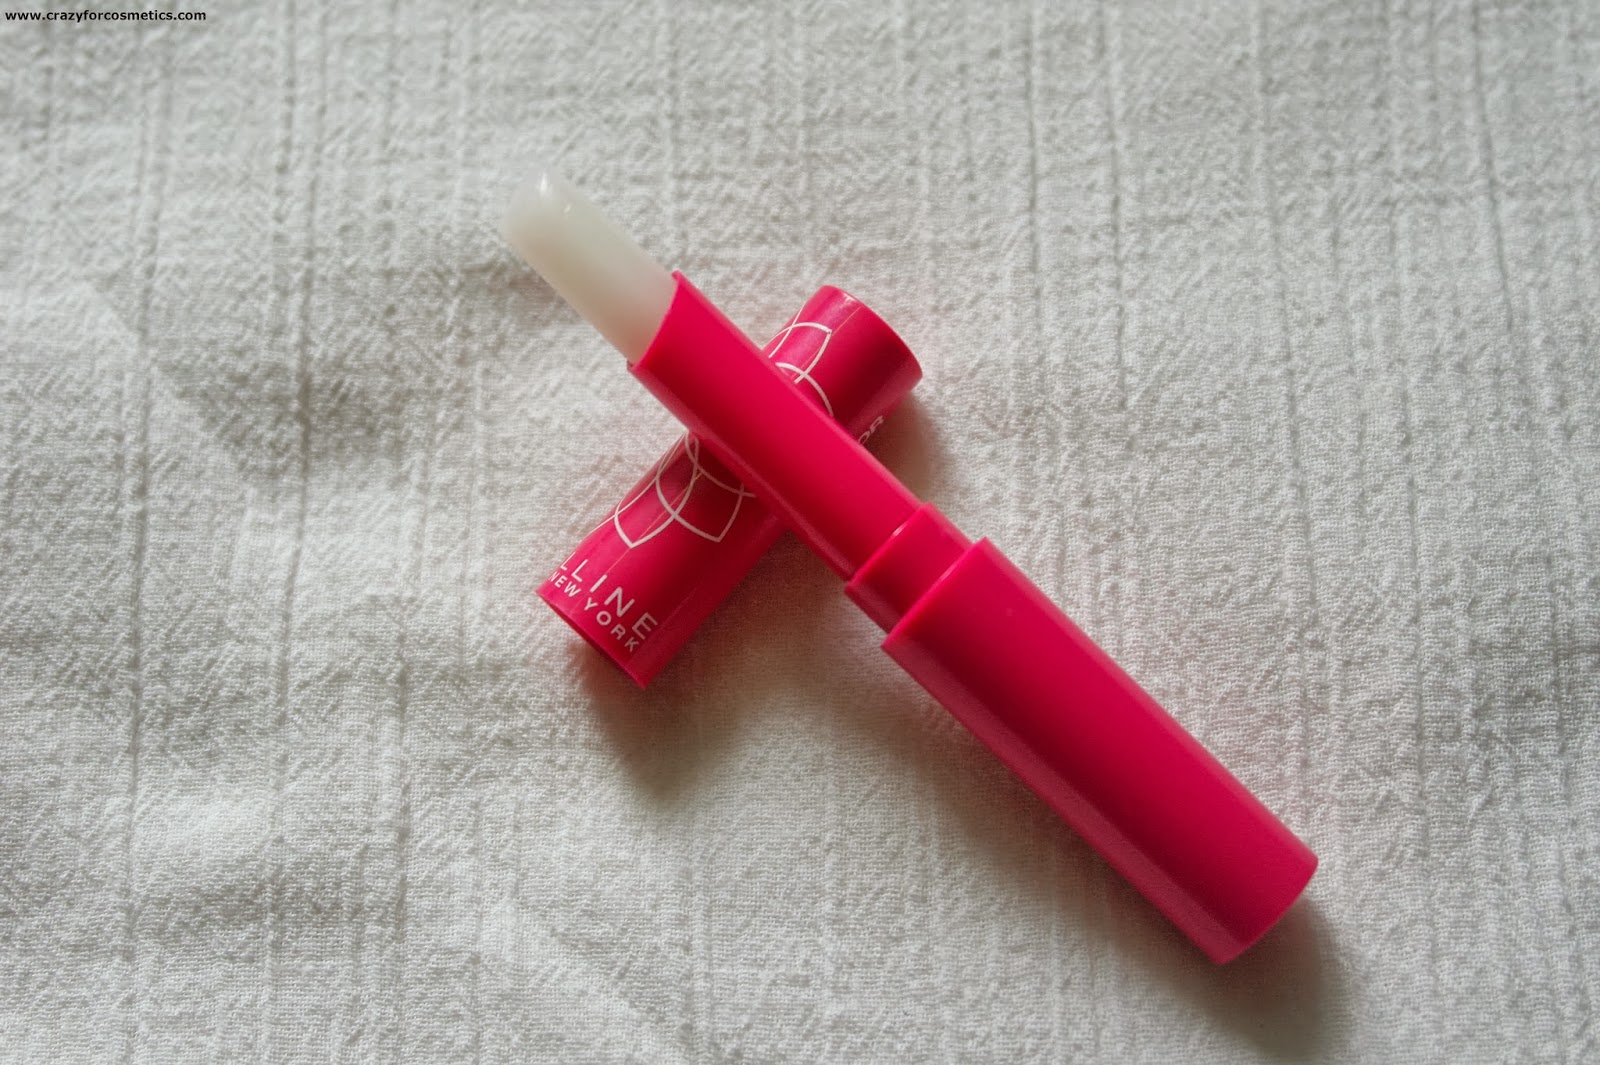 Maybelline Color changing lipbalm - pink blossom-swatches